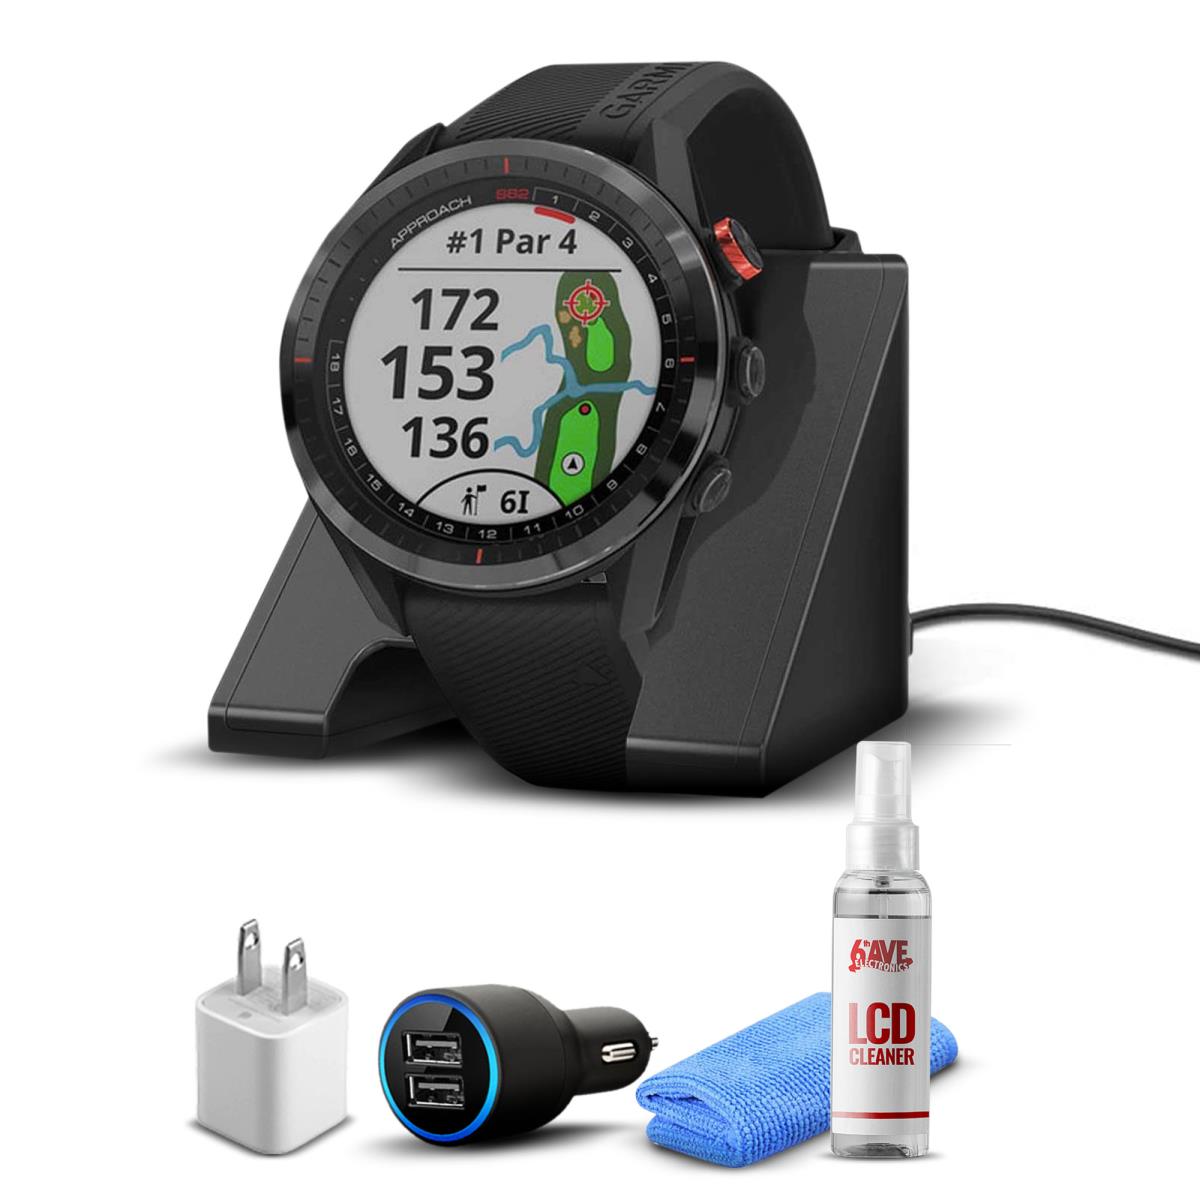 Garmin Approach S62 Gps Golf Watch + Charging Base + More Accessories